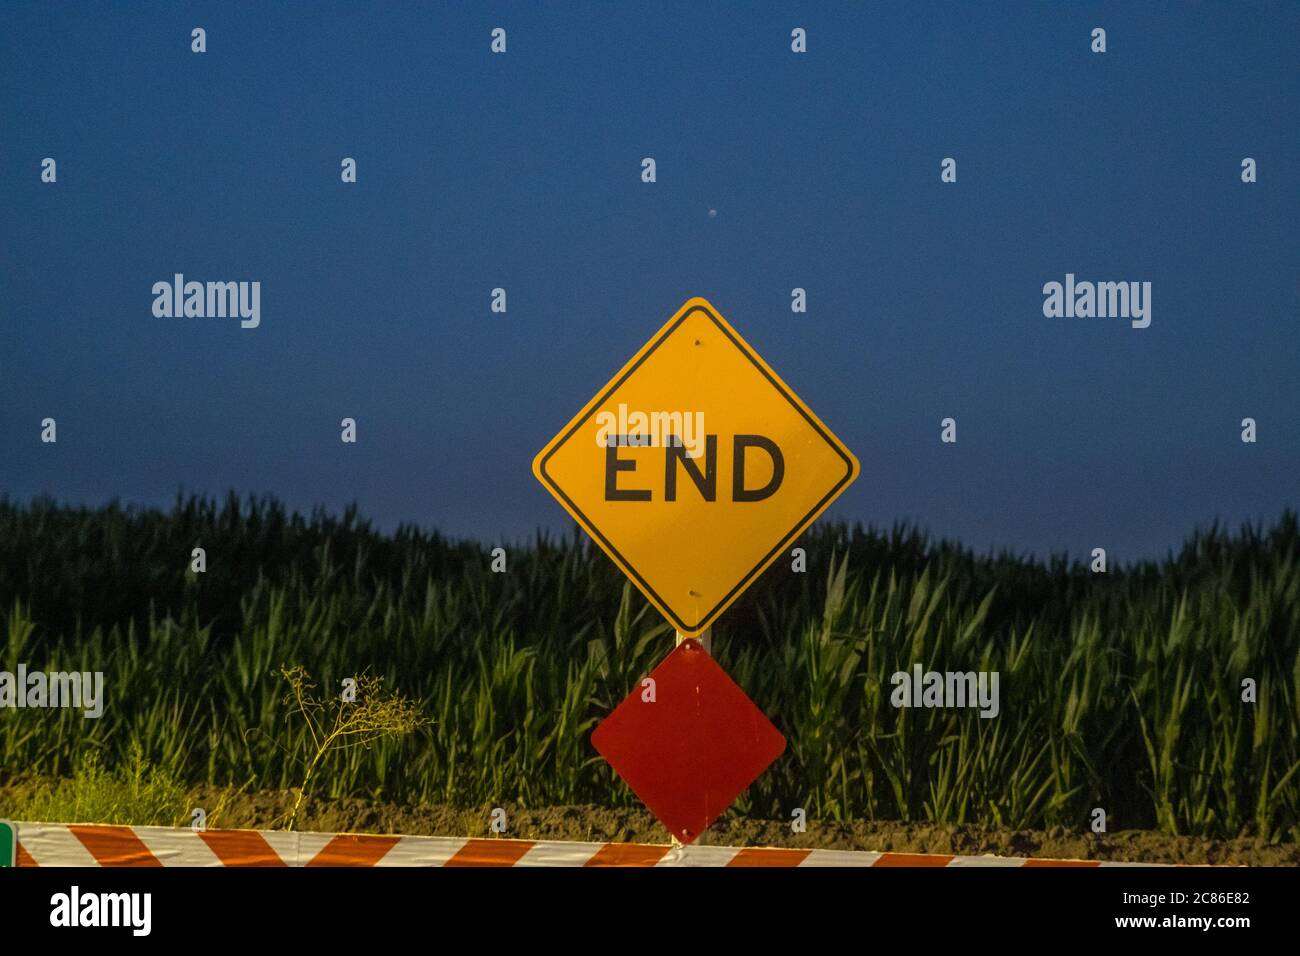 A sign signaling the end Stock Photo